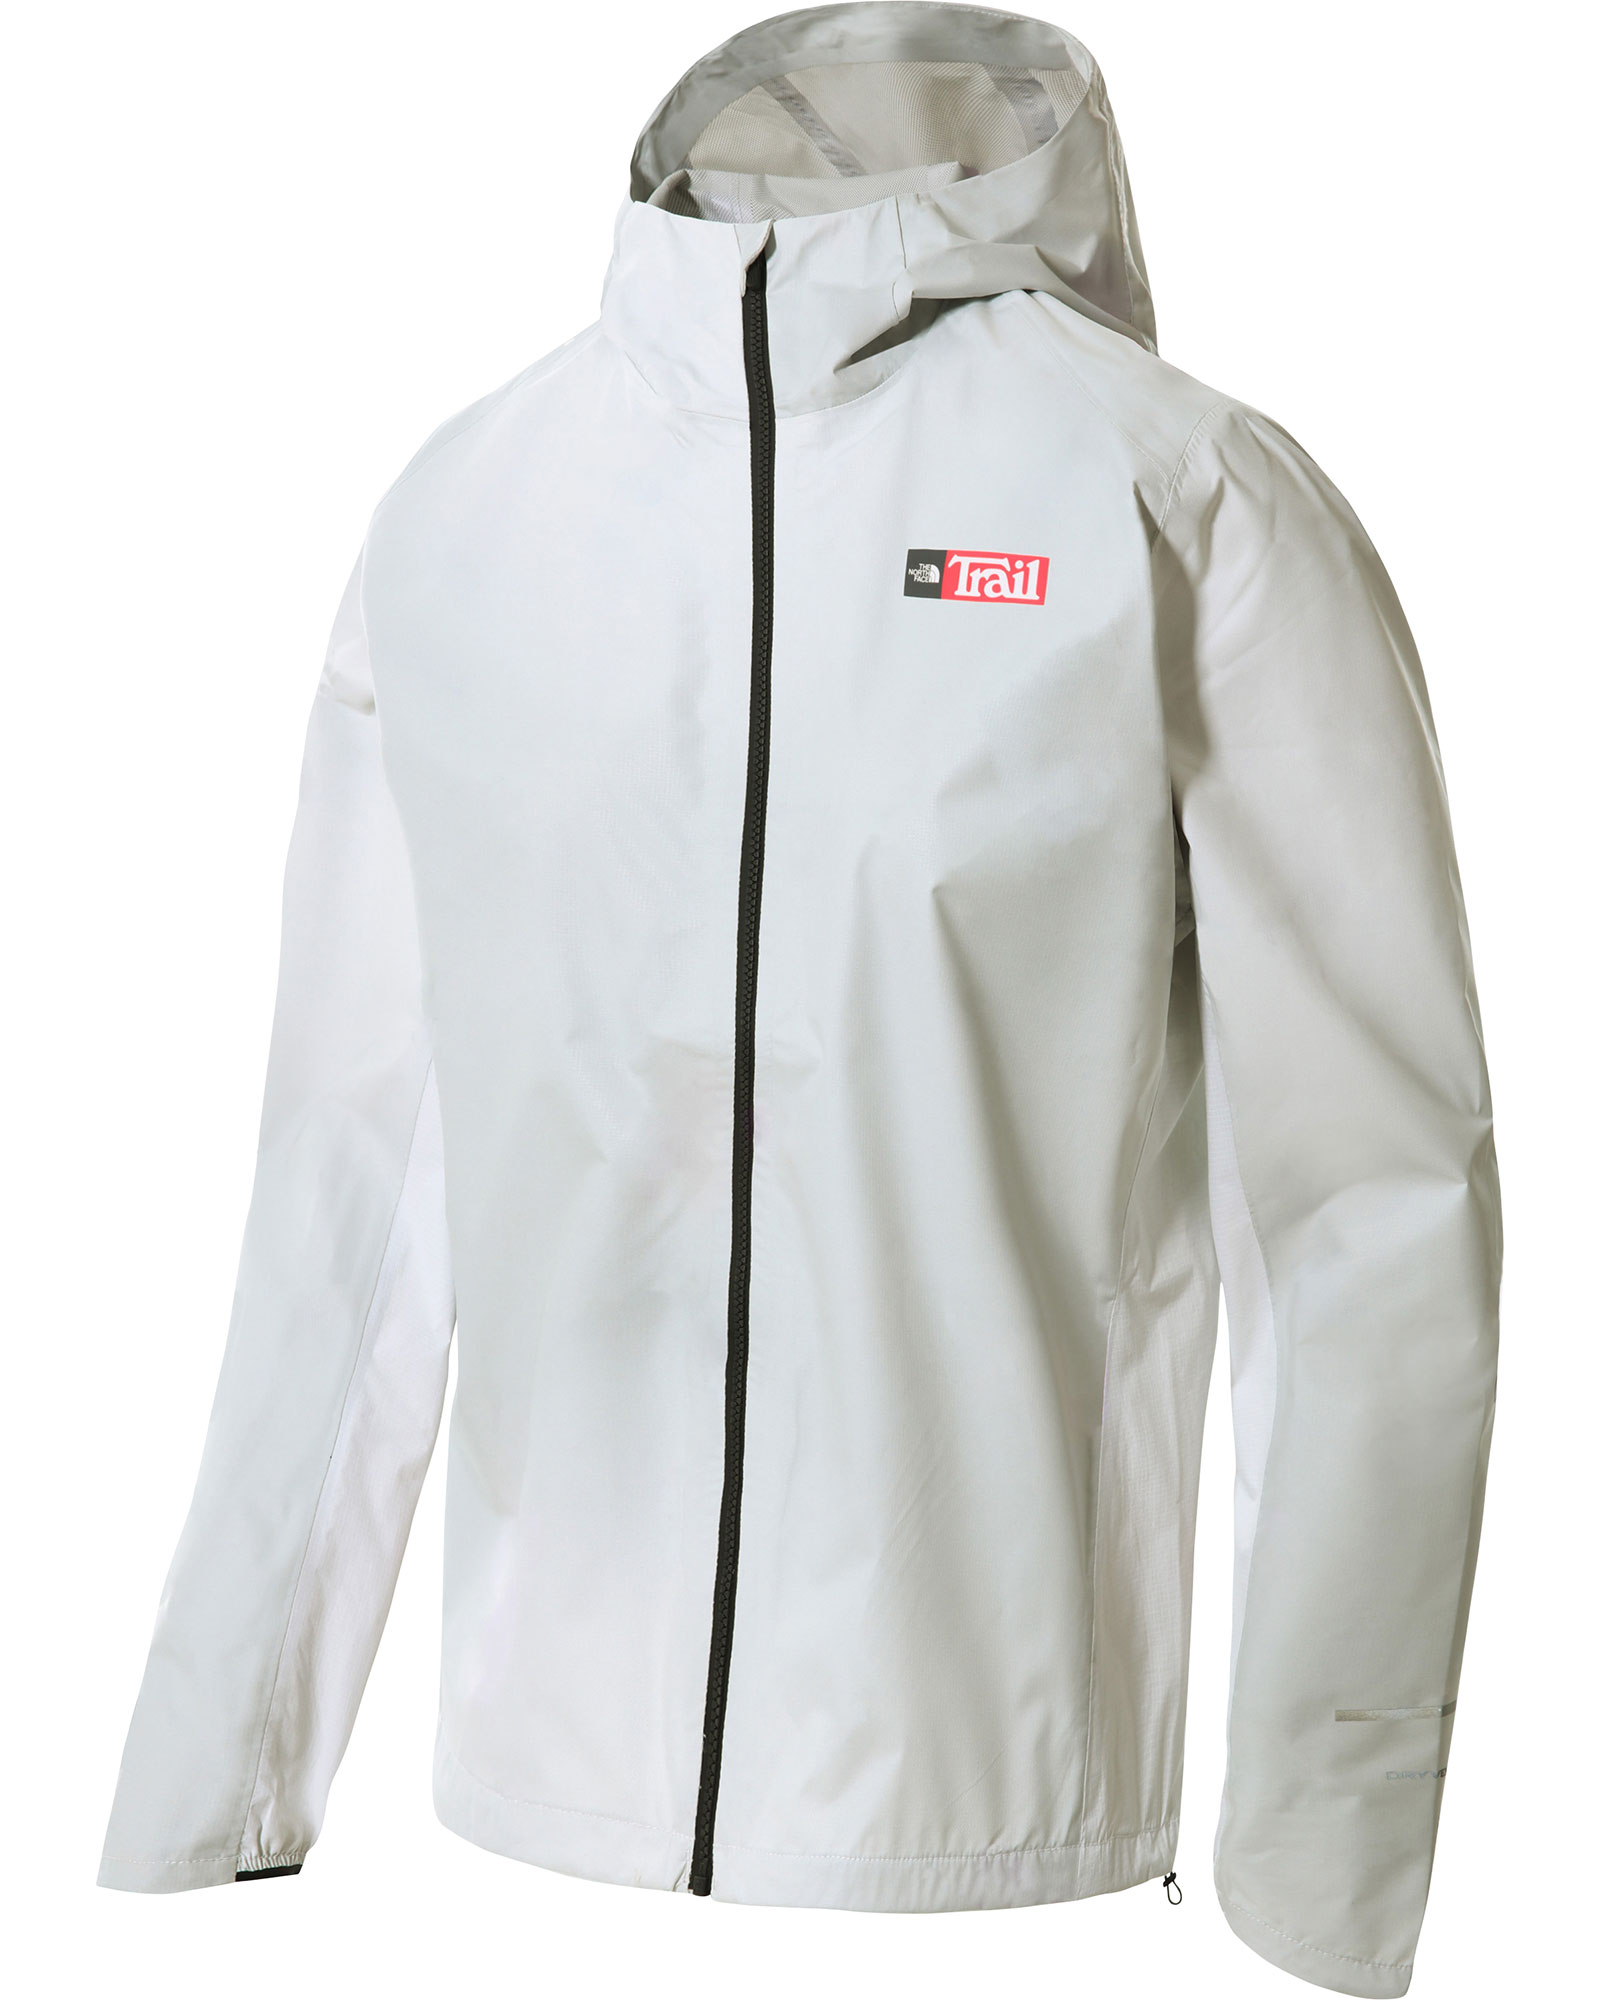 The North Face First Dawn Print Women’s Packable Jacket - TNF White Print XS